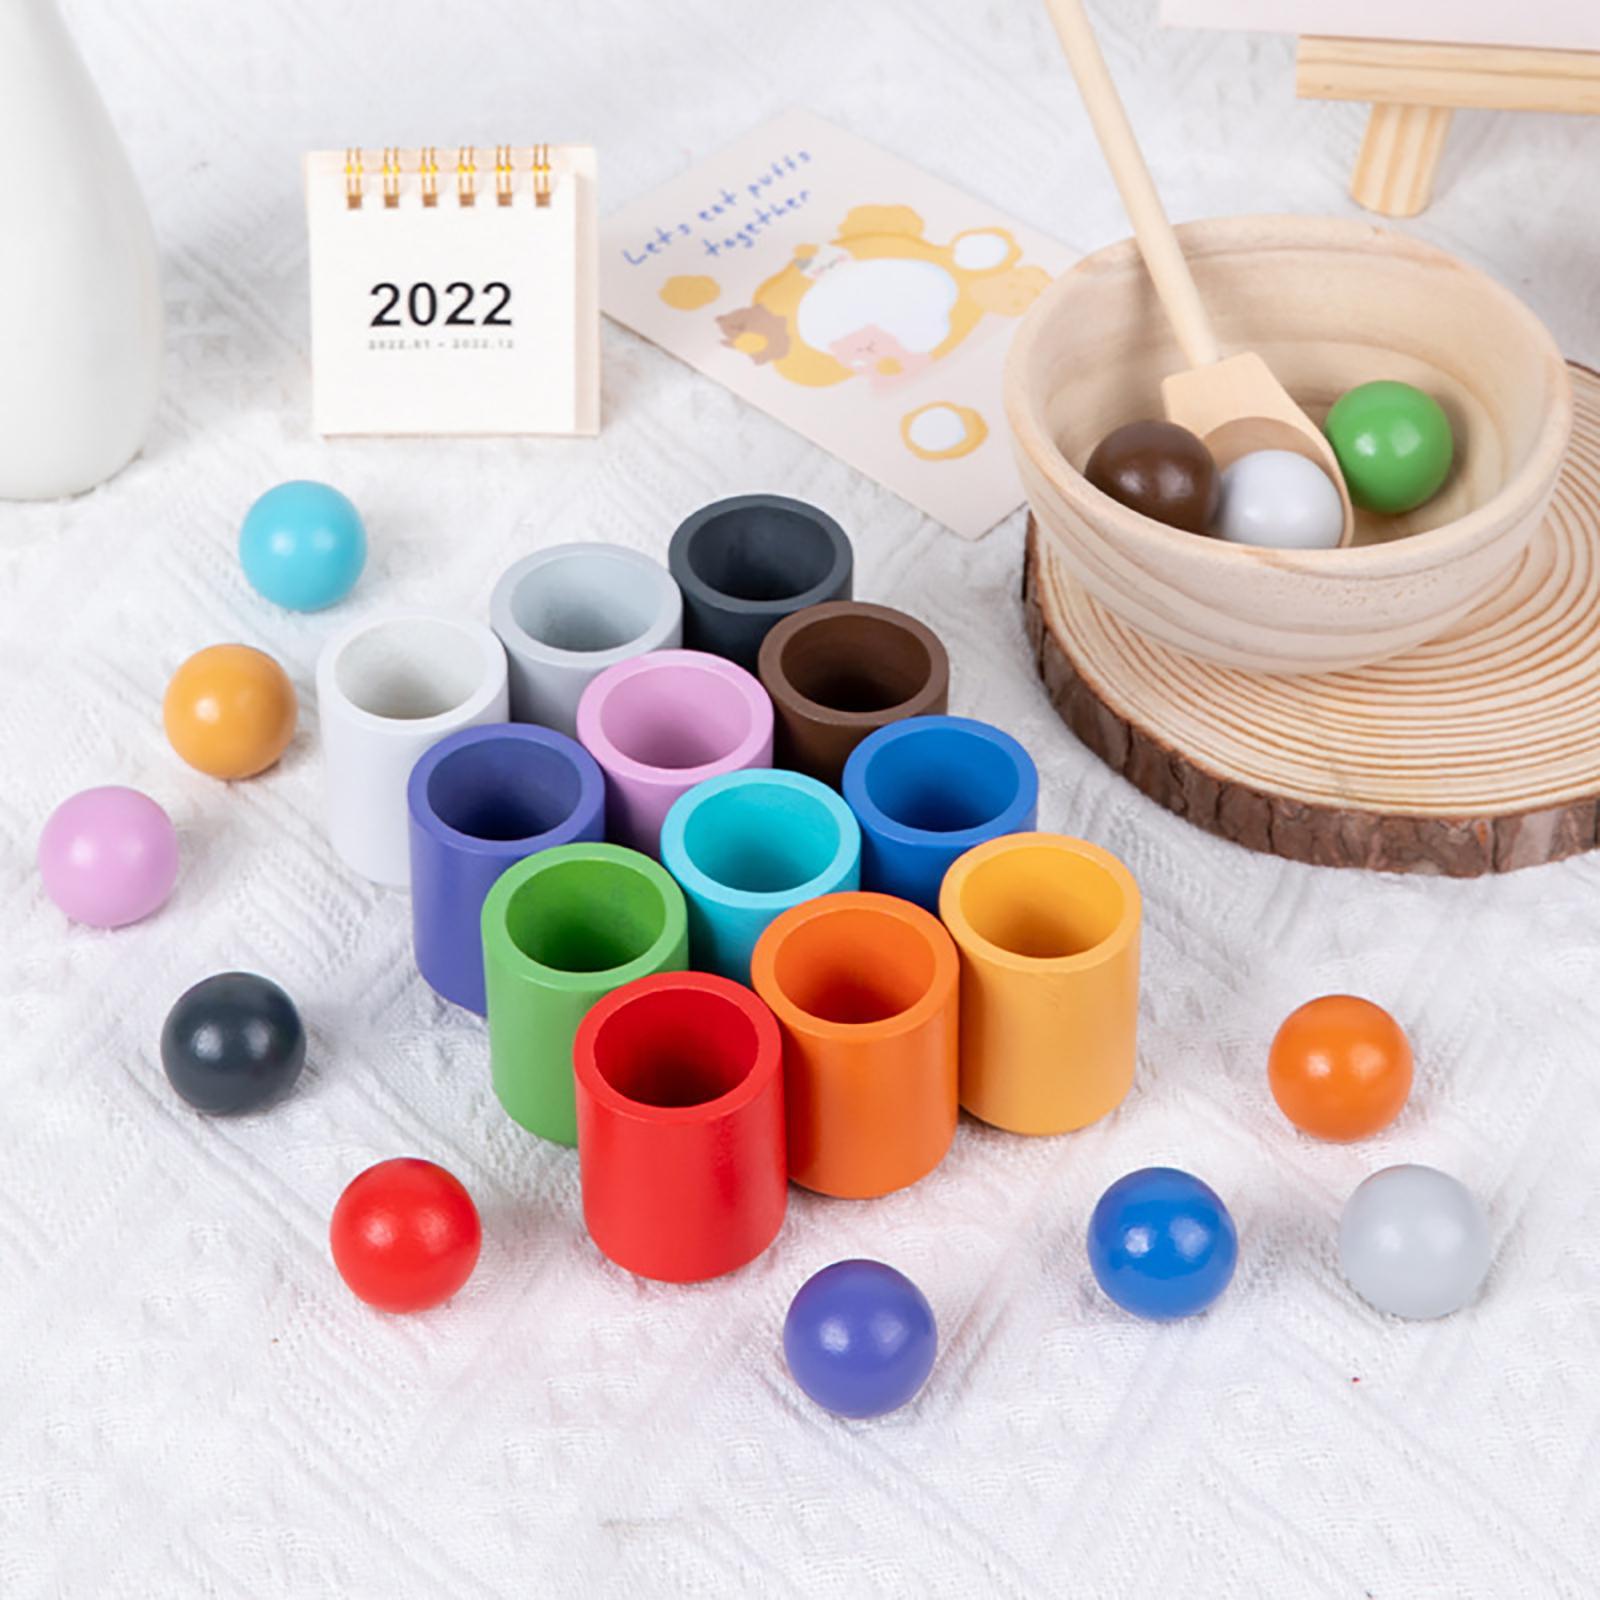 Sensorial Material Toy - Wooden Gradient Color Matching